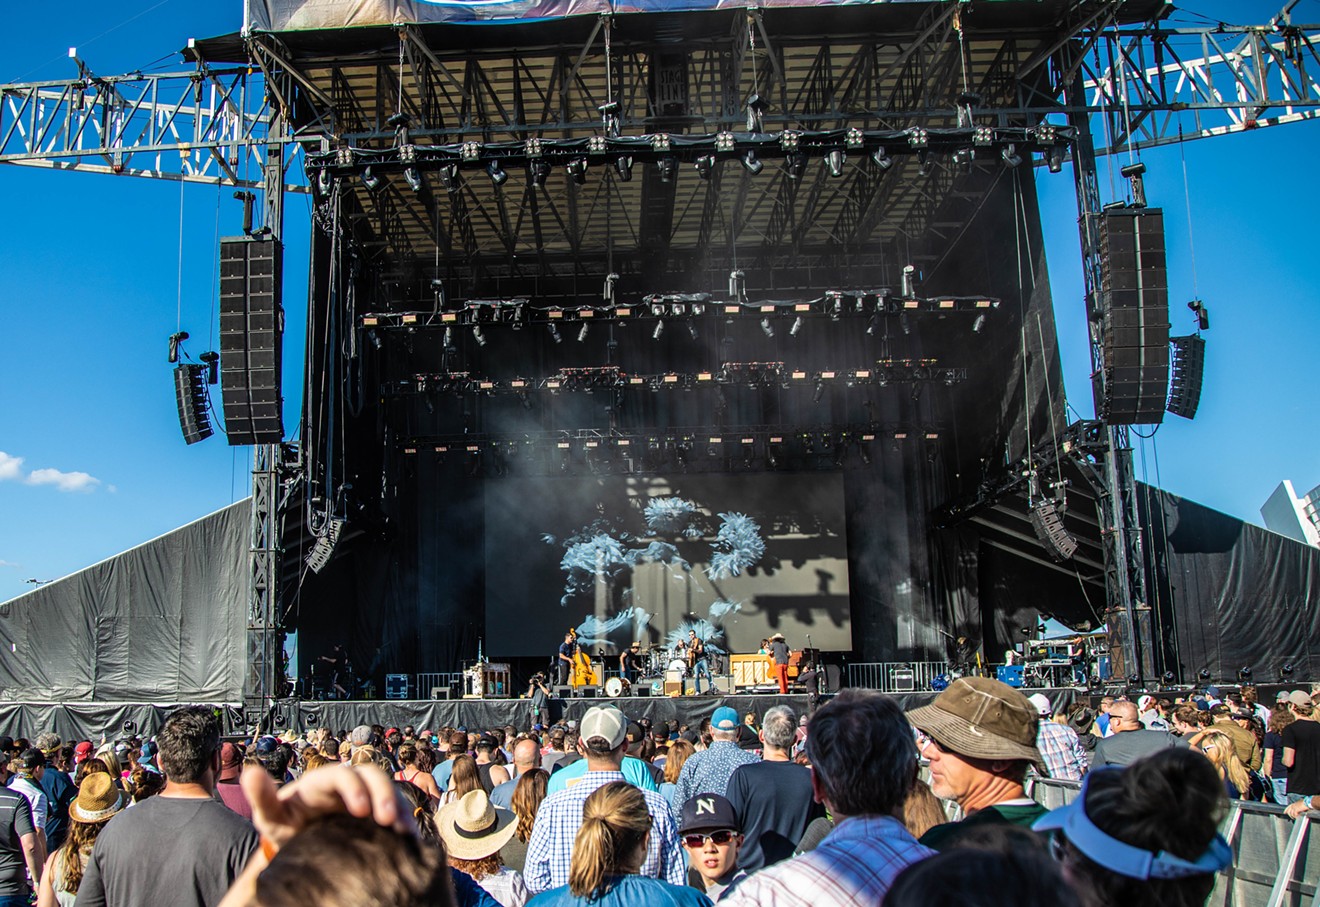 The Avett Brothers played a set this weekend at KAABOO festival, sorry, "lifestyle event."